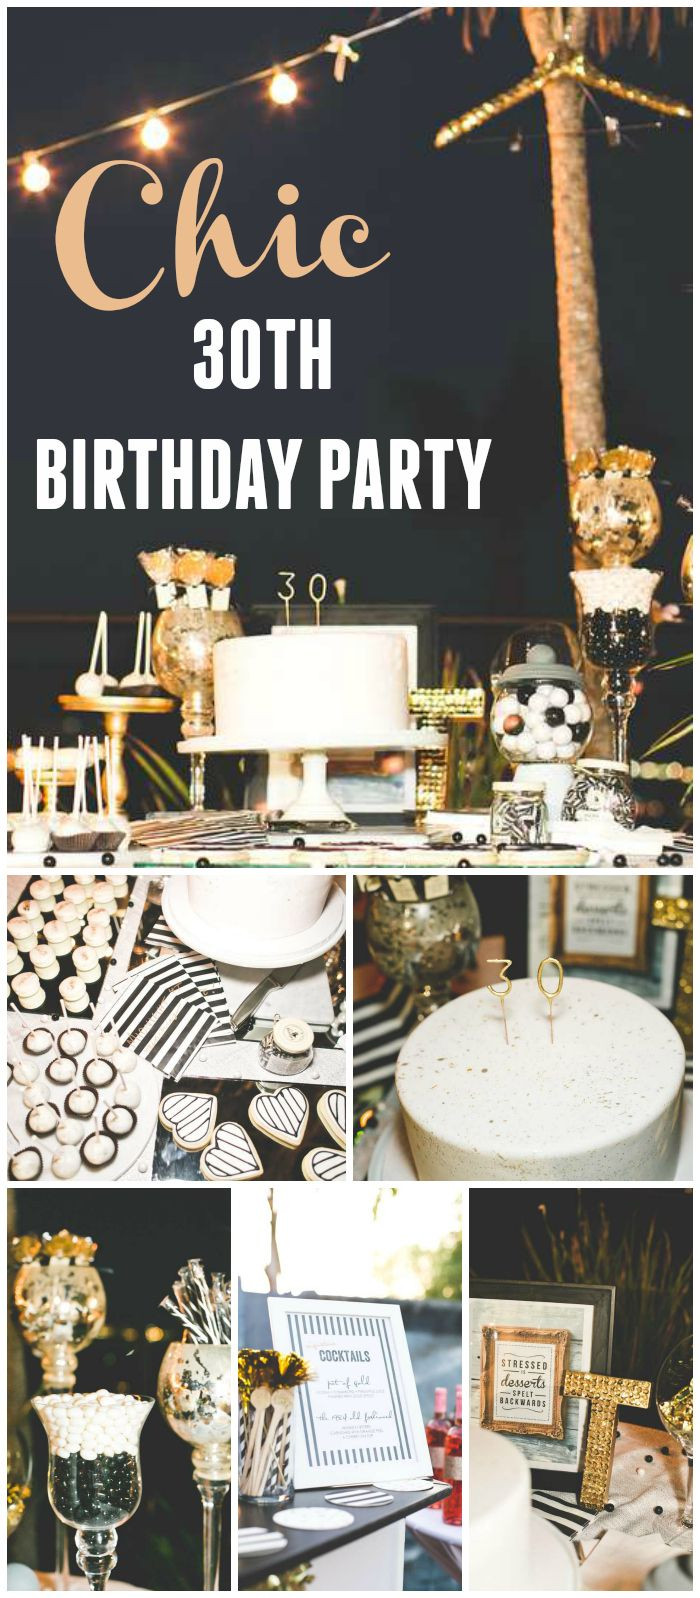 Black And Gold 30th Birthday Decorations
 A 30th birthday cocktail event decorated in black & white